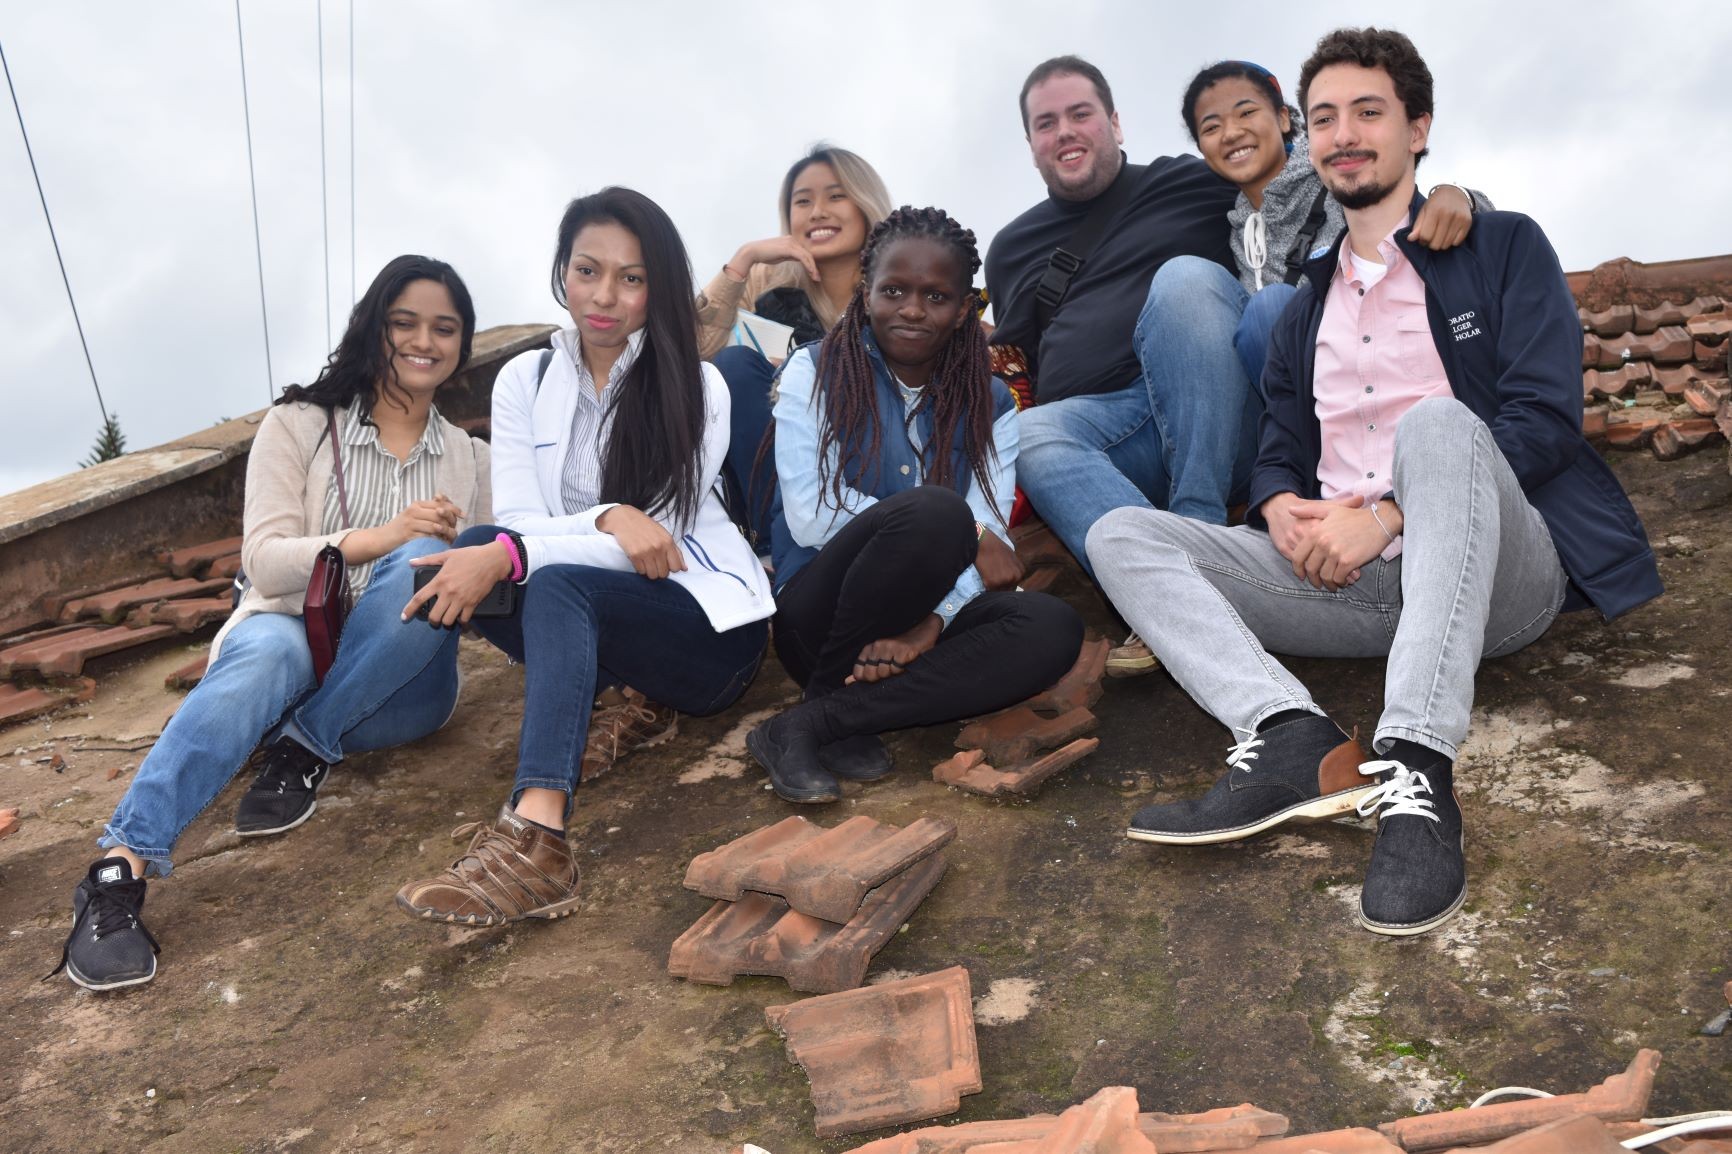 The Kraft Global Fellows for Summer 2019 during their visit to Tunapanda Institute – Kibera (L-R) Giselle Fernades-Dental Science, Denisse Pineda, Office of University Chaplain, Columbia University-, Ruoxin Feng-Philosophy and Political Science, Renise Owner-Tech Trainer, Tunapanda Institute,  Jared Payne – Architecture, Planning and Preservation Major, Yasna Vismale-Financial Economics and Jazz Studies and Nathan Santos-History and Latin America, Caribbean Studies share a ‘rooftop’ moment during the group’